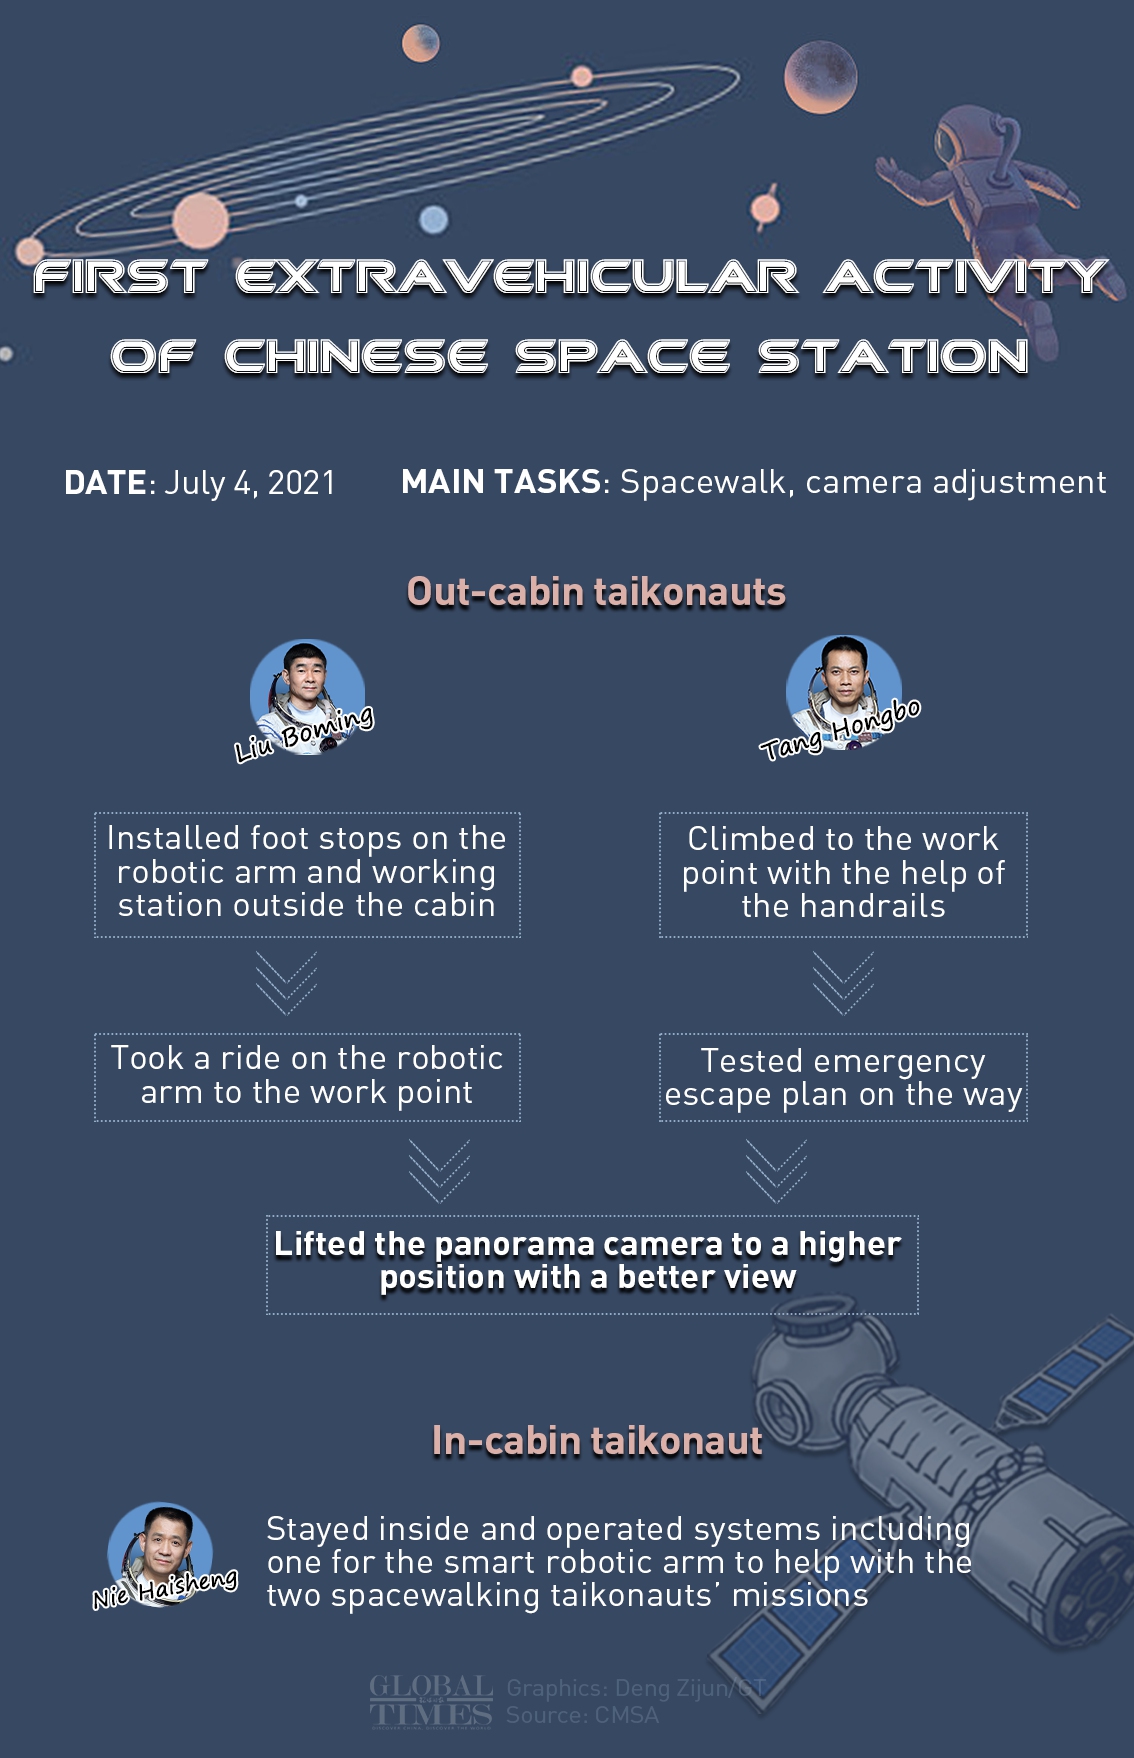 First Extravehicular Activity of Chinese Space Station Infographic: Deng Zijun/GT